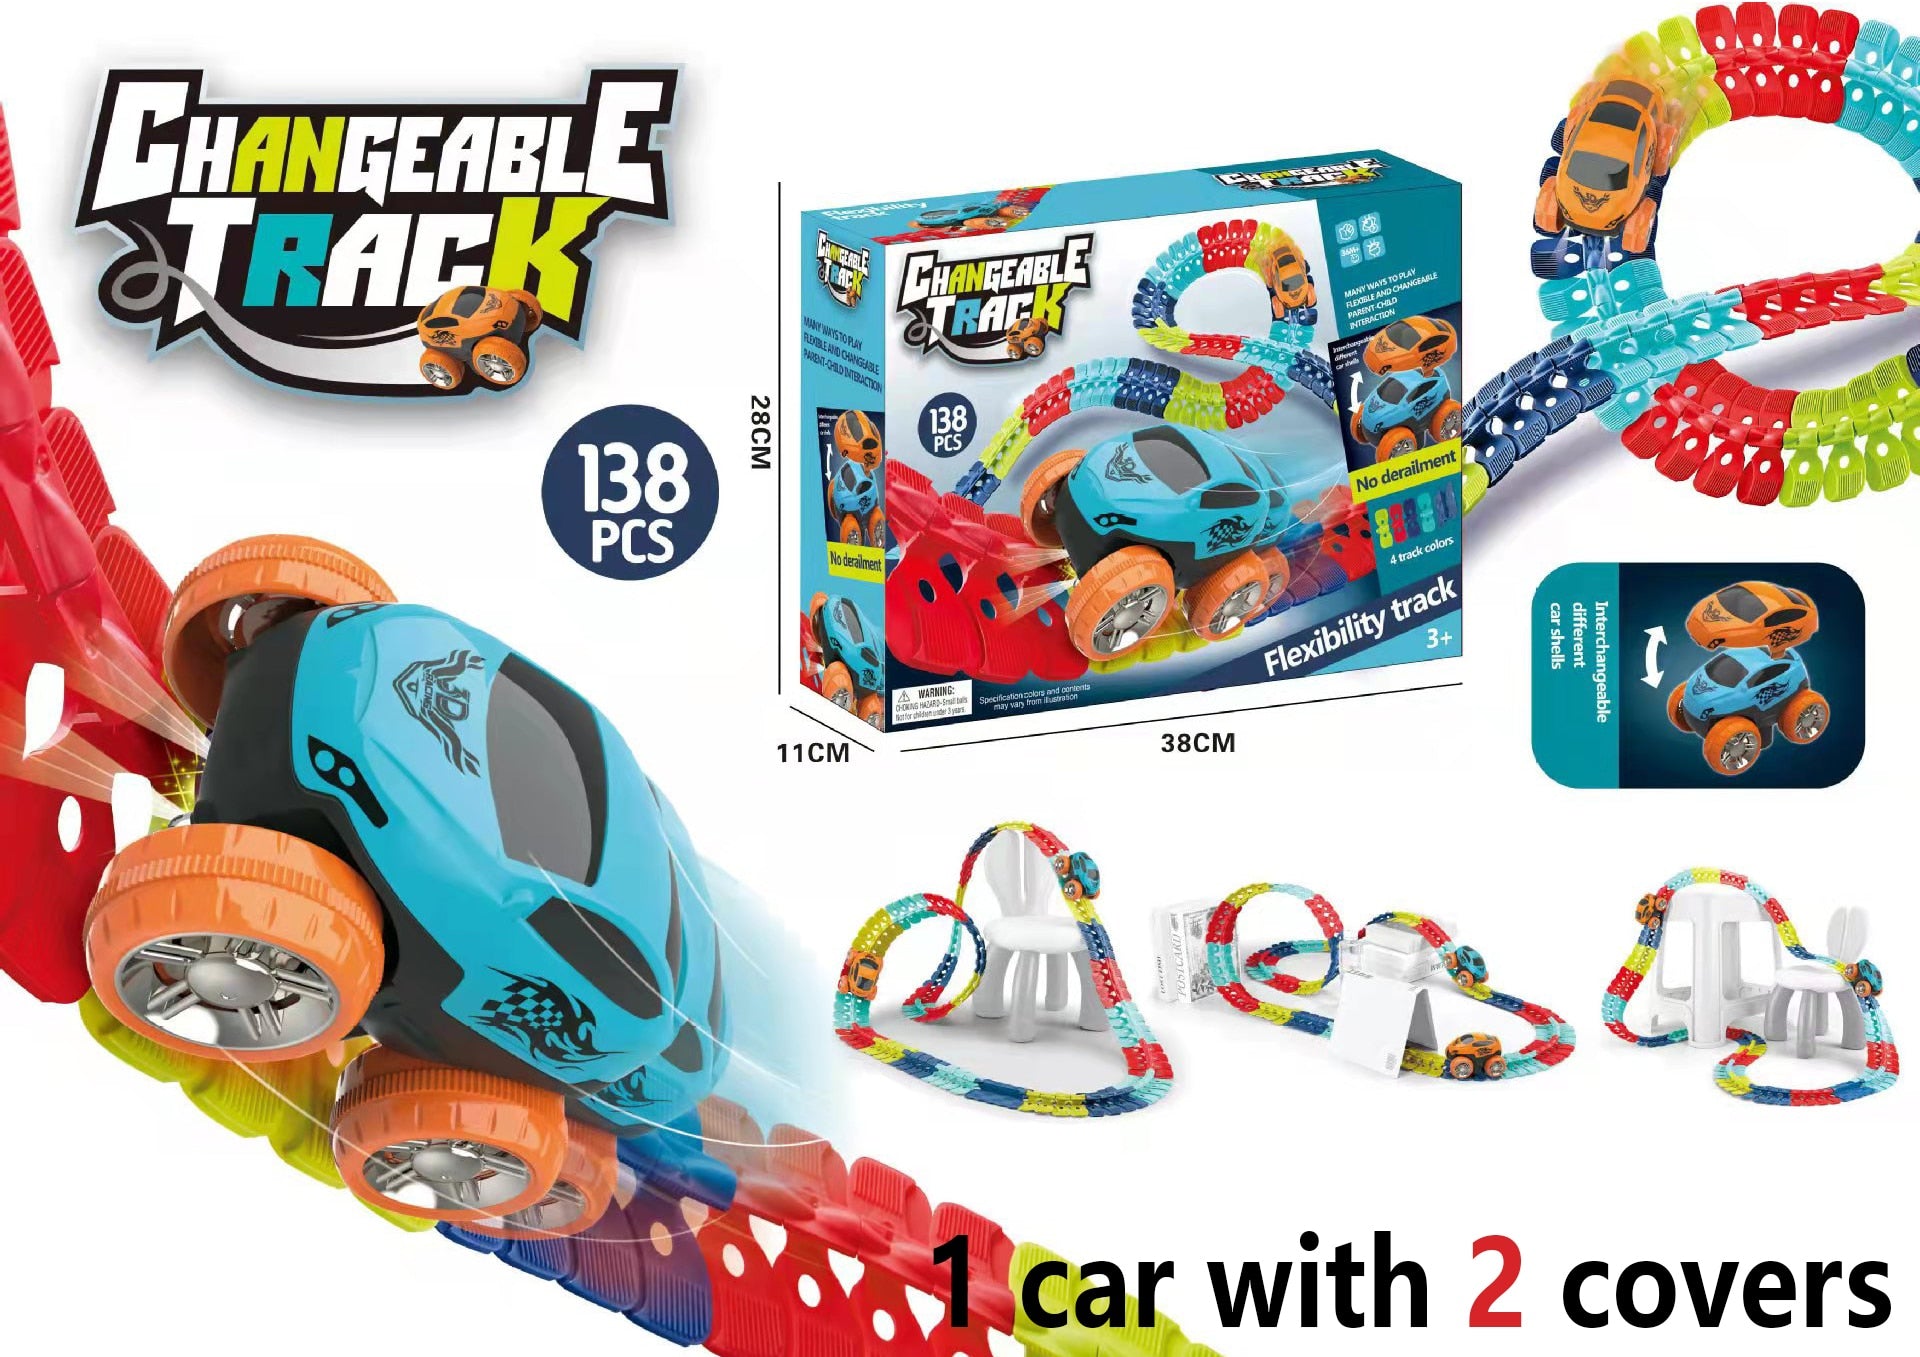 The Z1 Flexible Car Toy with LED